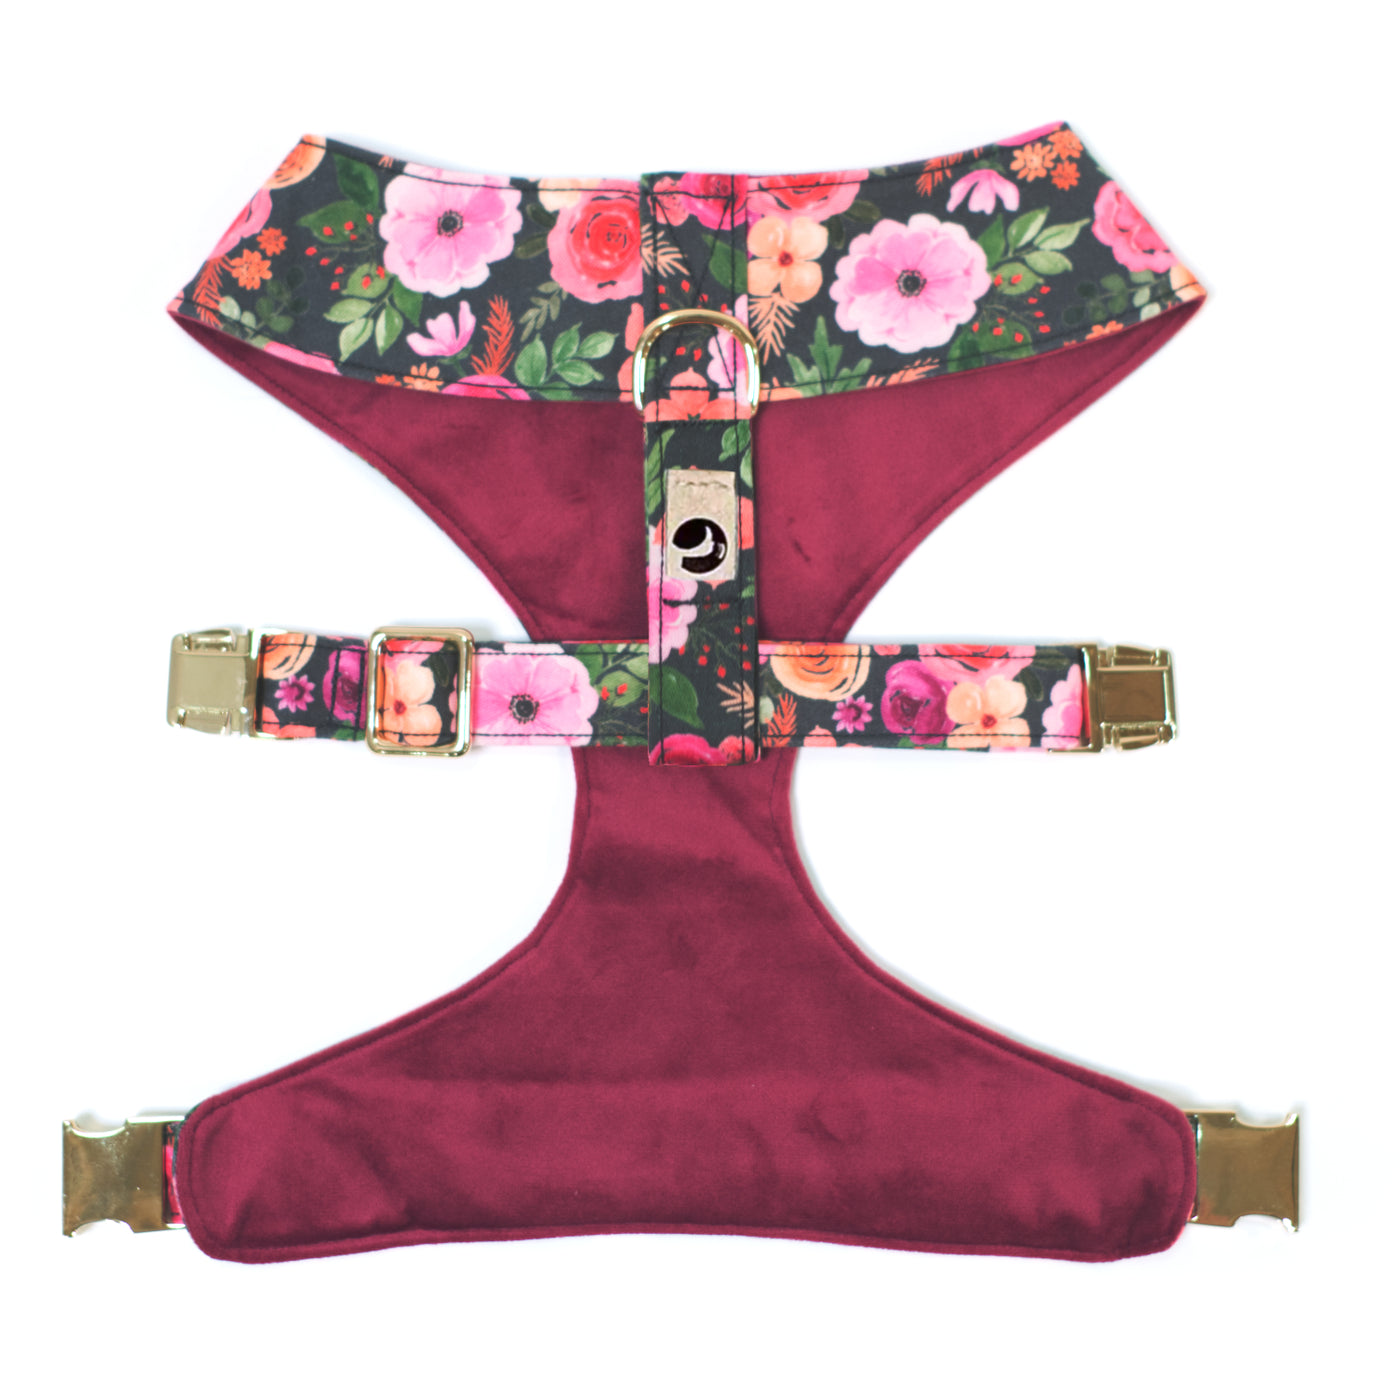 Top/back reversible dog harness with burgundy velvet reverse and gold hardware